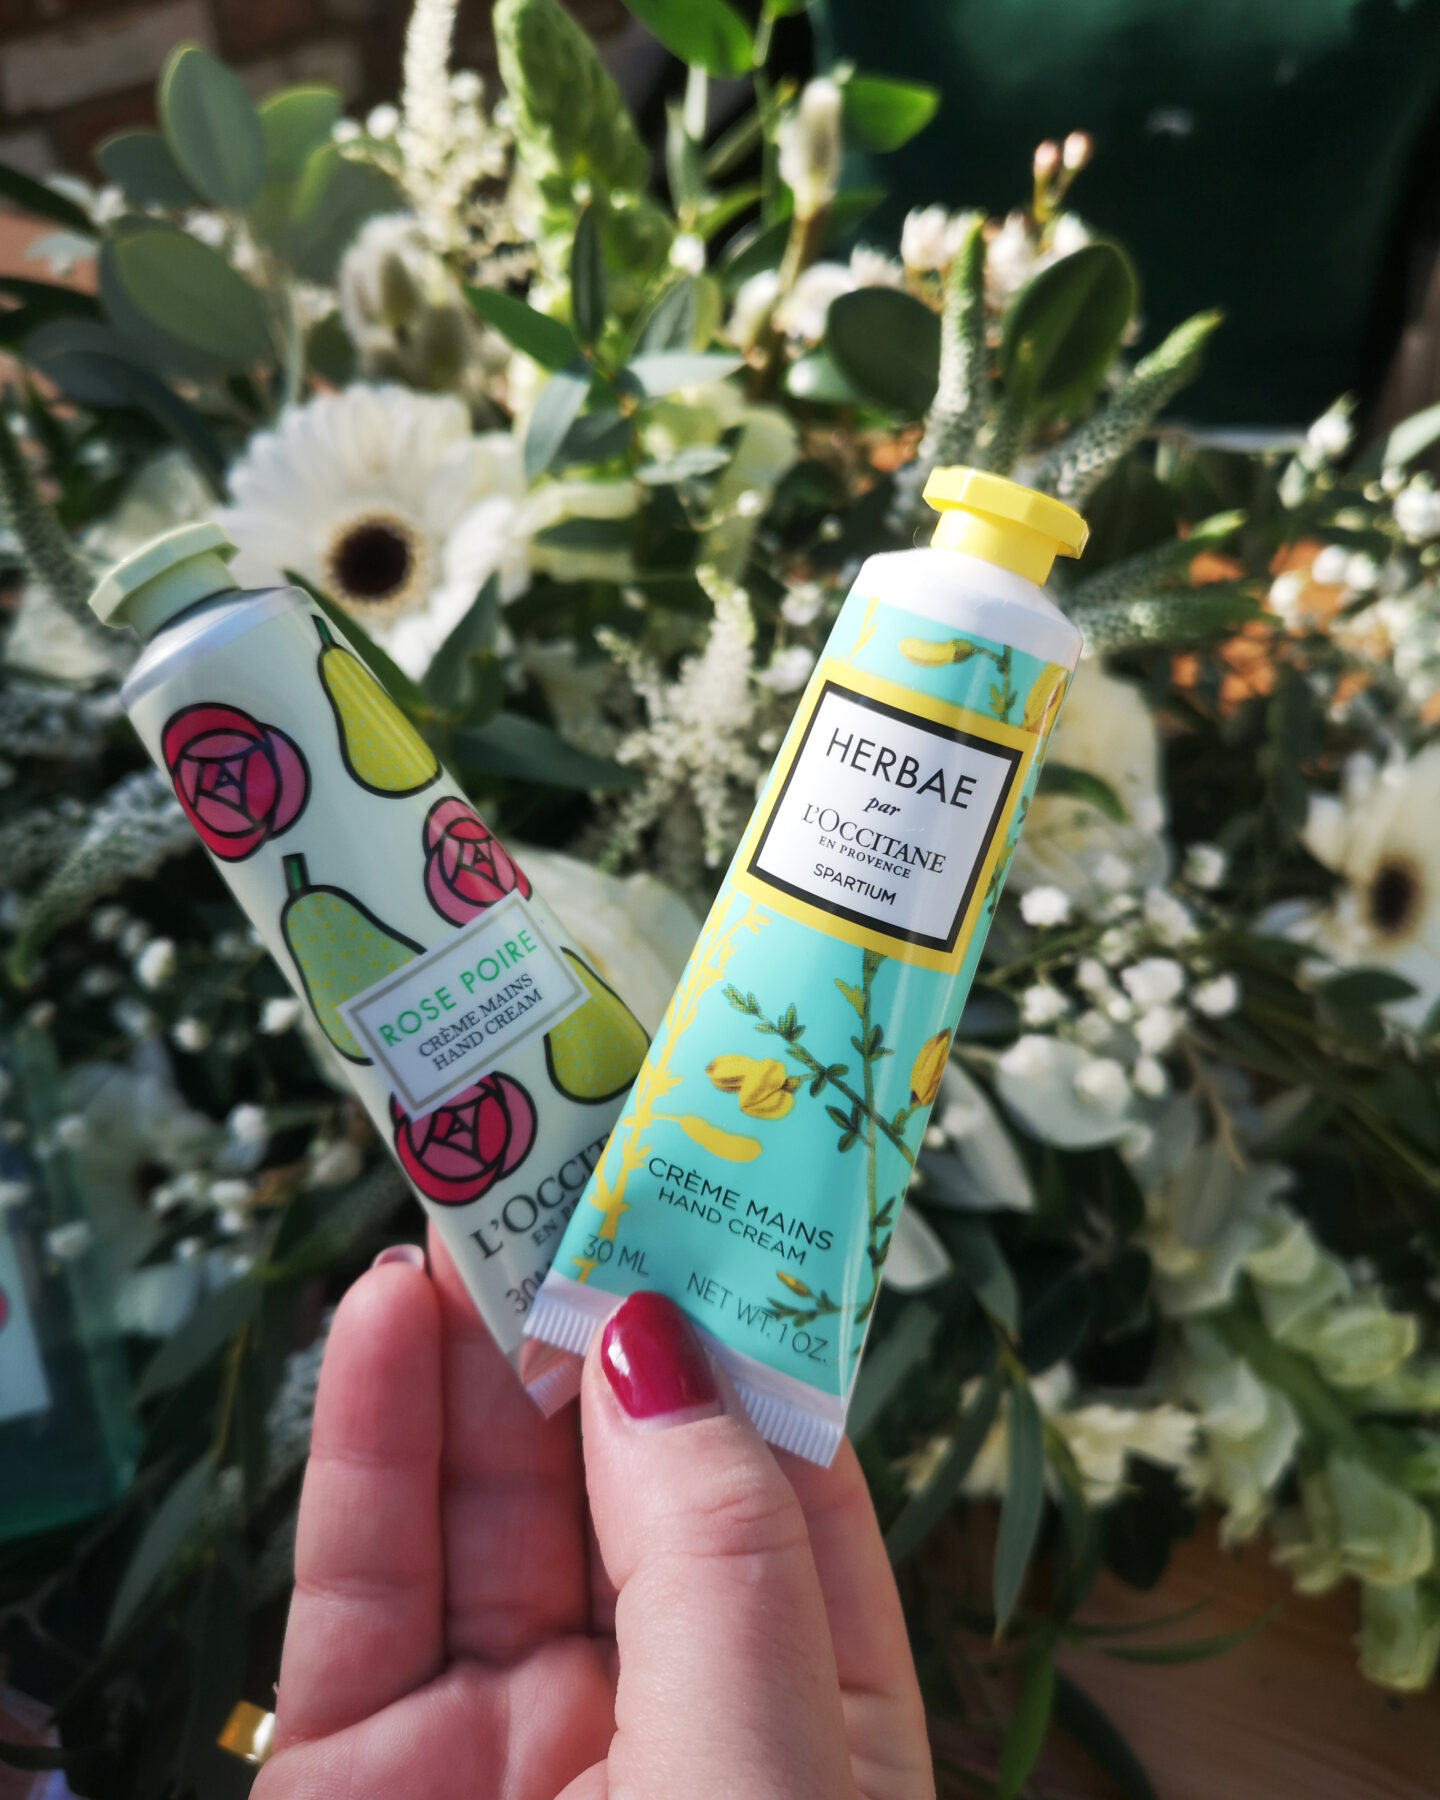 L'OCCITANE Limited Edition, Beauty, skincare products, natural products, Valentine's Gift Sets, Valentine's Day Giveaway, L'OCCITANE EN PROVENCE, win, Competition, French beauty, the Frenchie Mummy, Rose Pear, Herbae